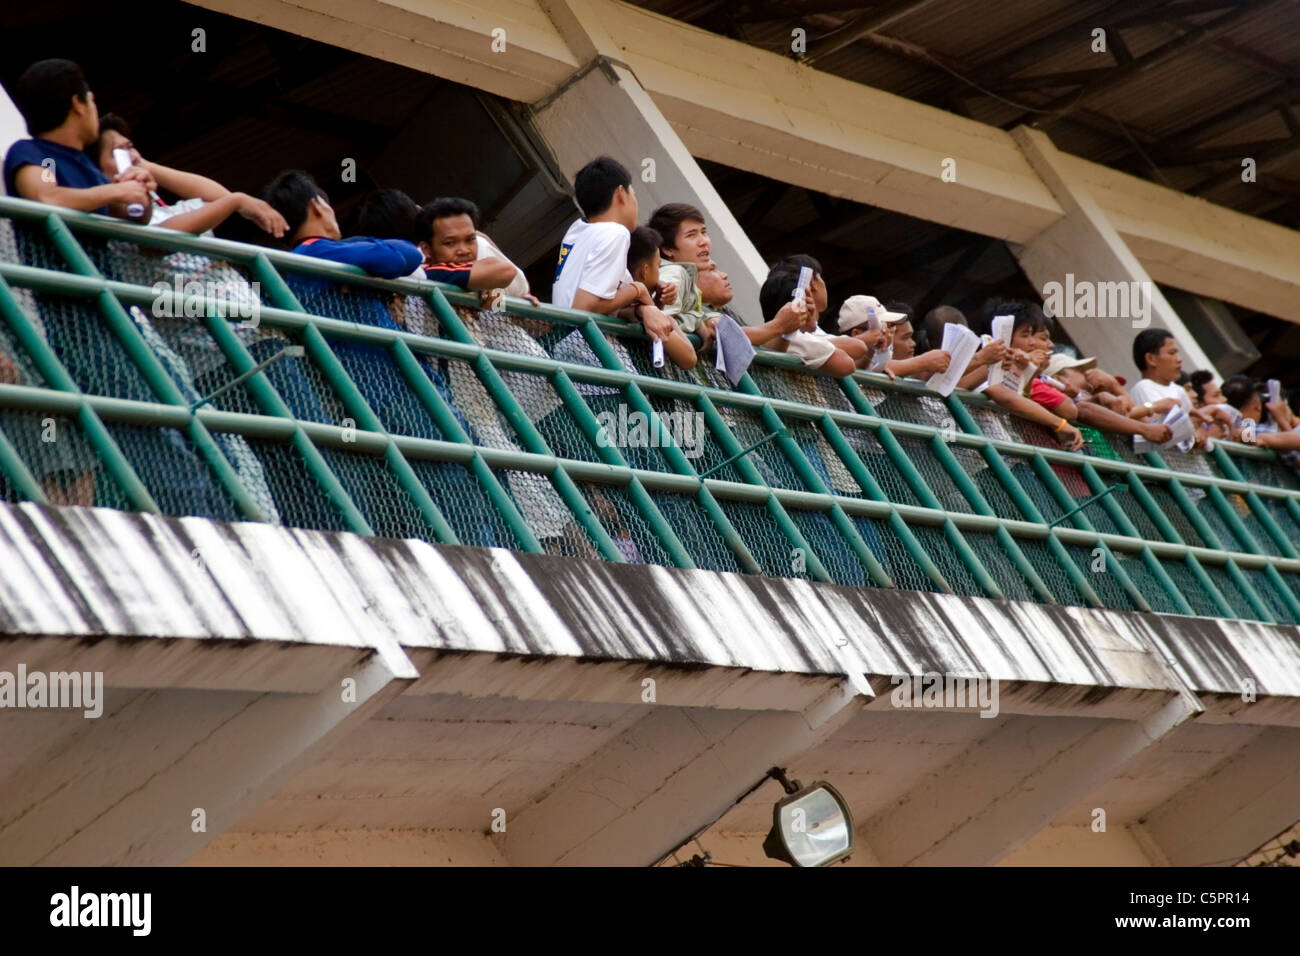 Horse racing fans are leaning on a balcony rail watching a horse race at a race track in Khorat, Thailand. Stock Photo